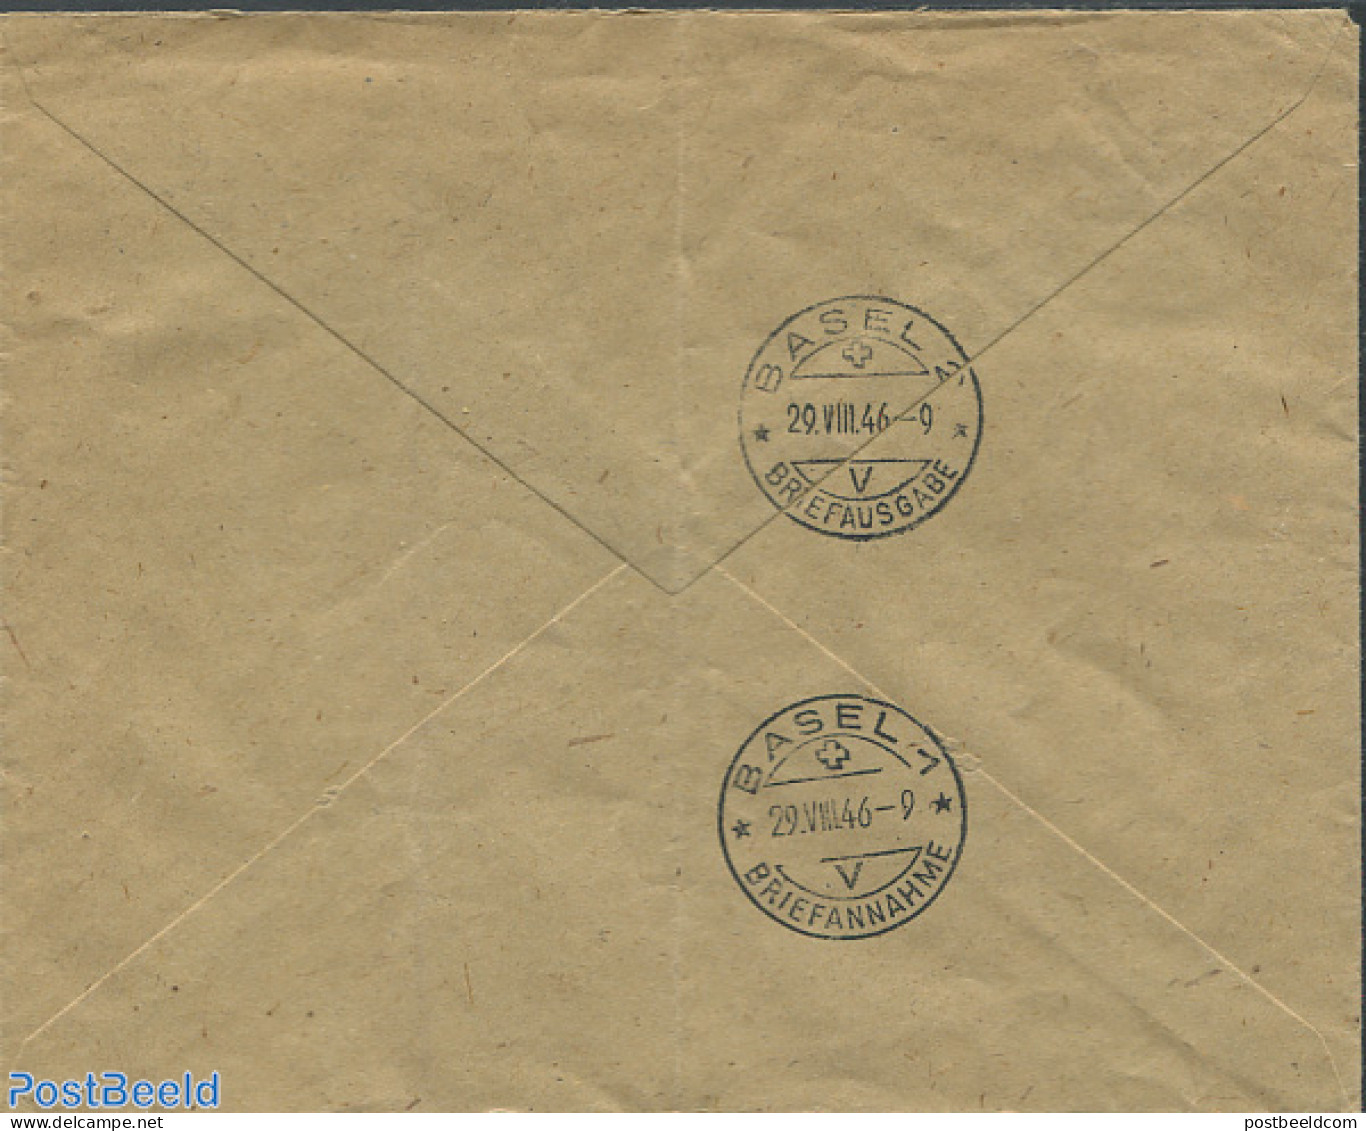 Netherlands 1940 Registered Envelope With Nvph 340, Postal History, History - Kings & Queens (Royalty) - Covers & Documents